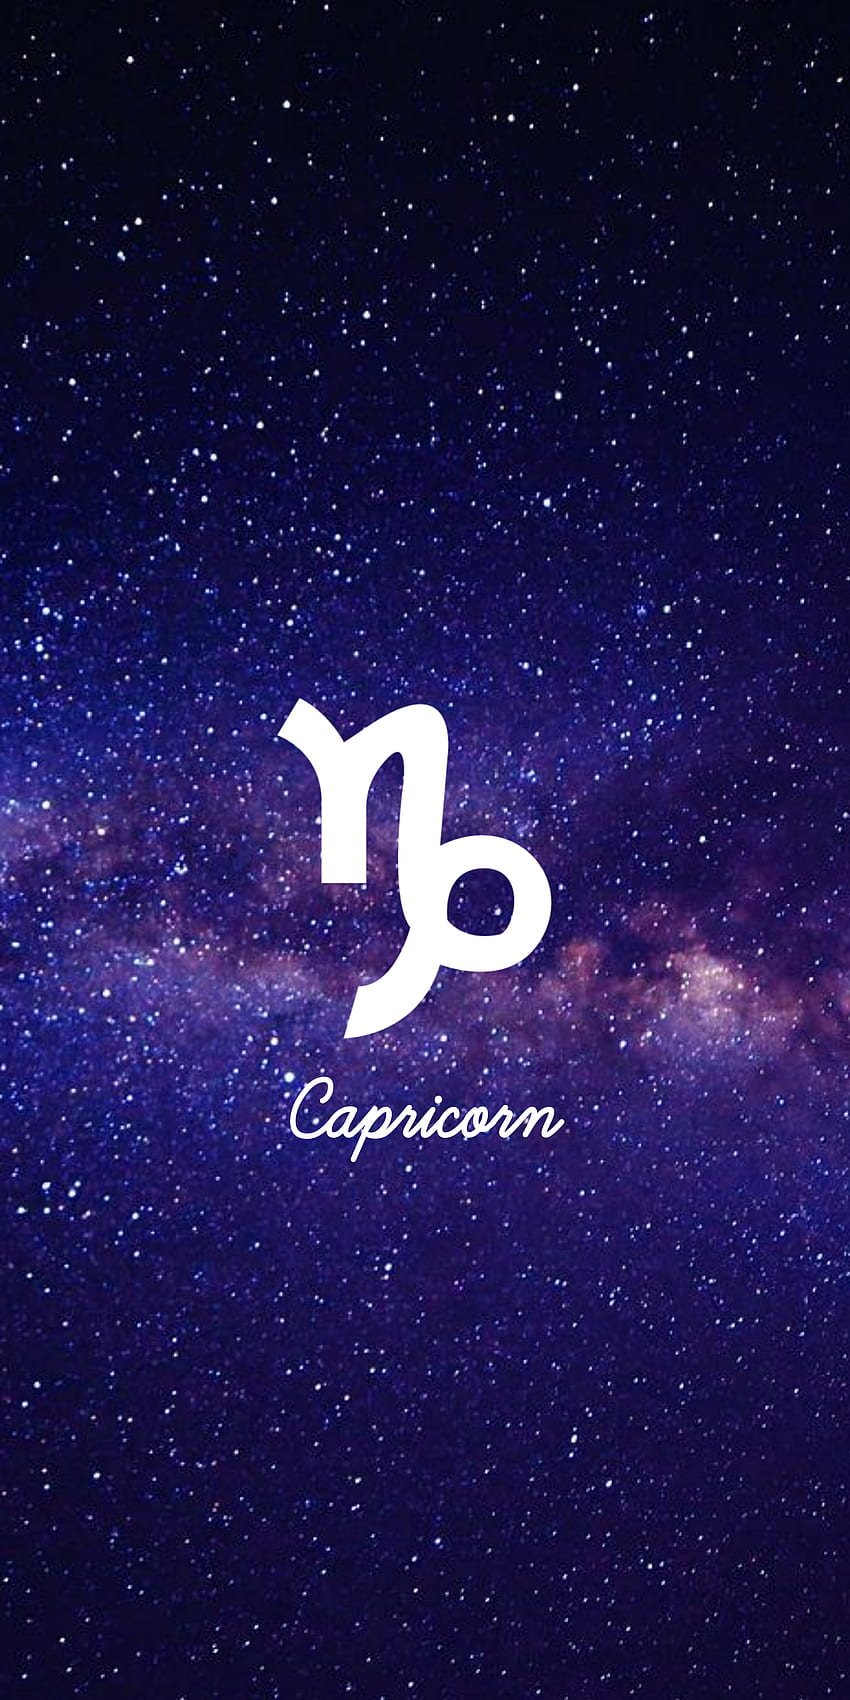 Capricorn Zodiac Sign Stock Photos and Images - 123RF